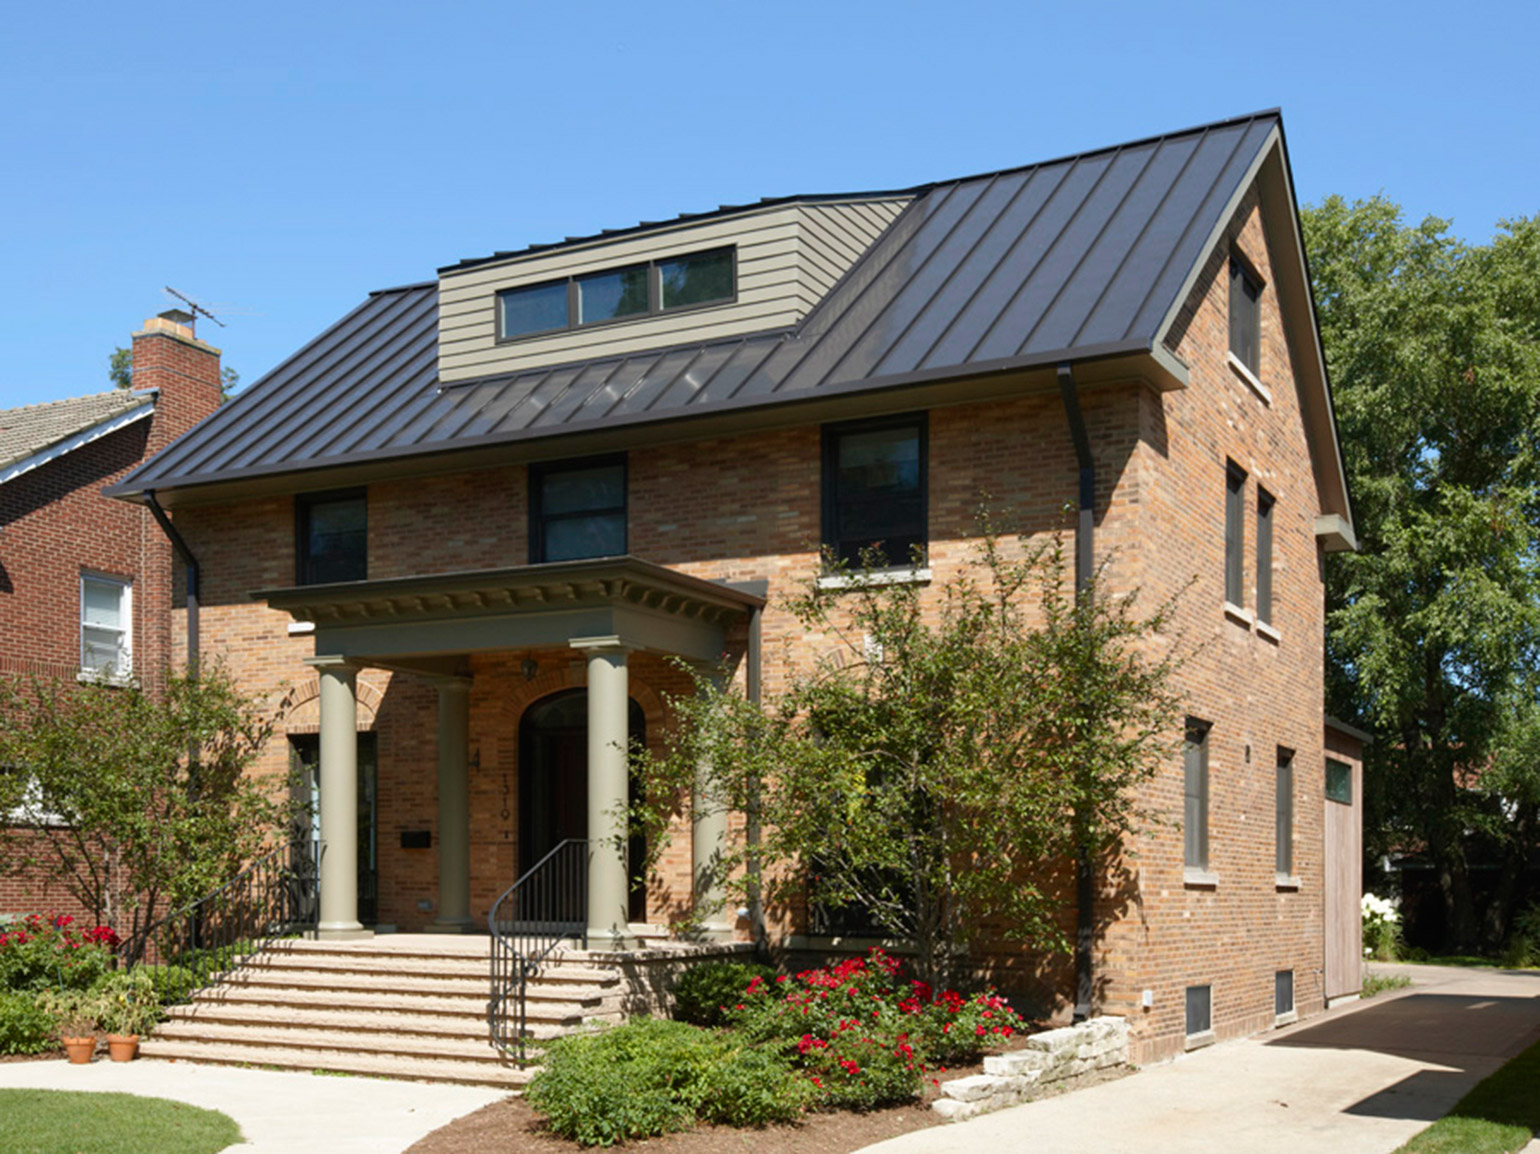 Modern_Sustainability_Content_1_Front_exterior.jpg